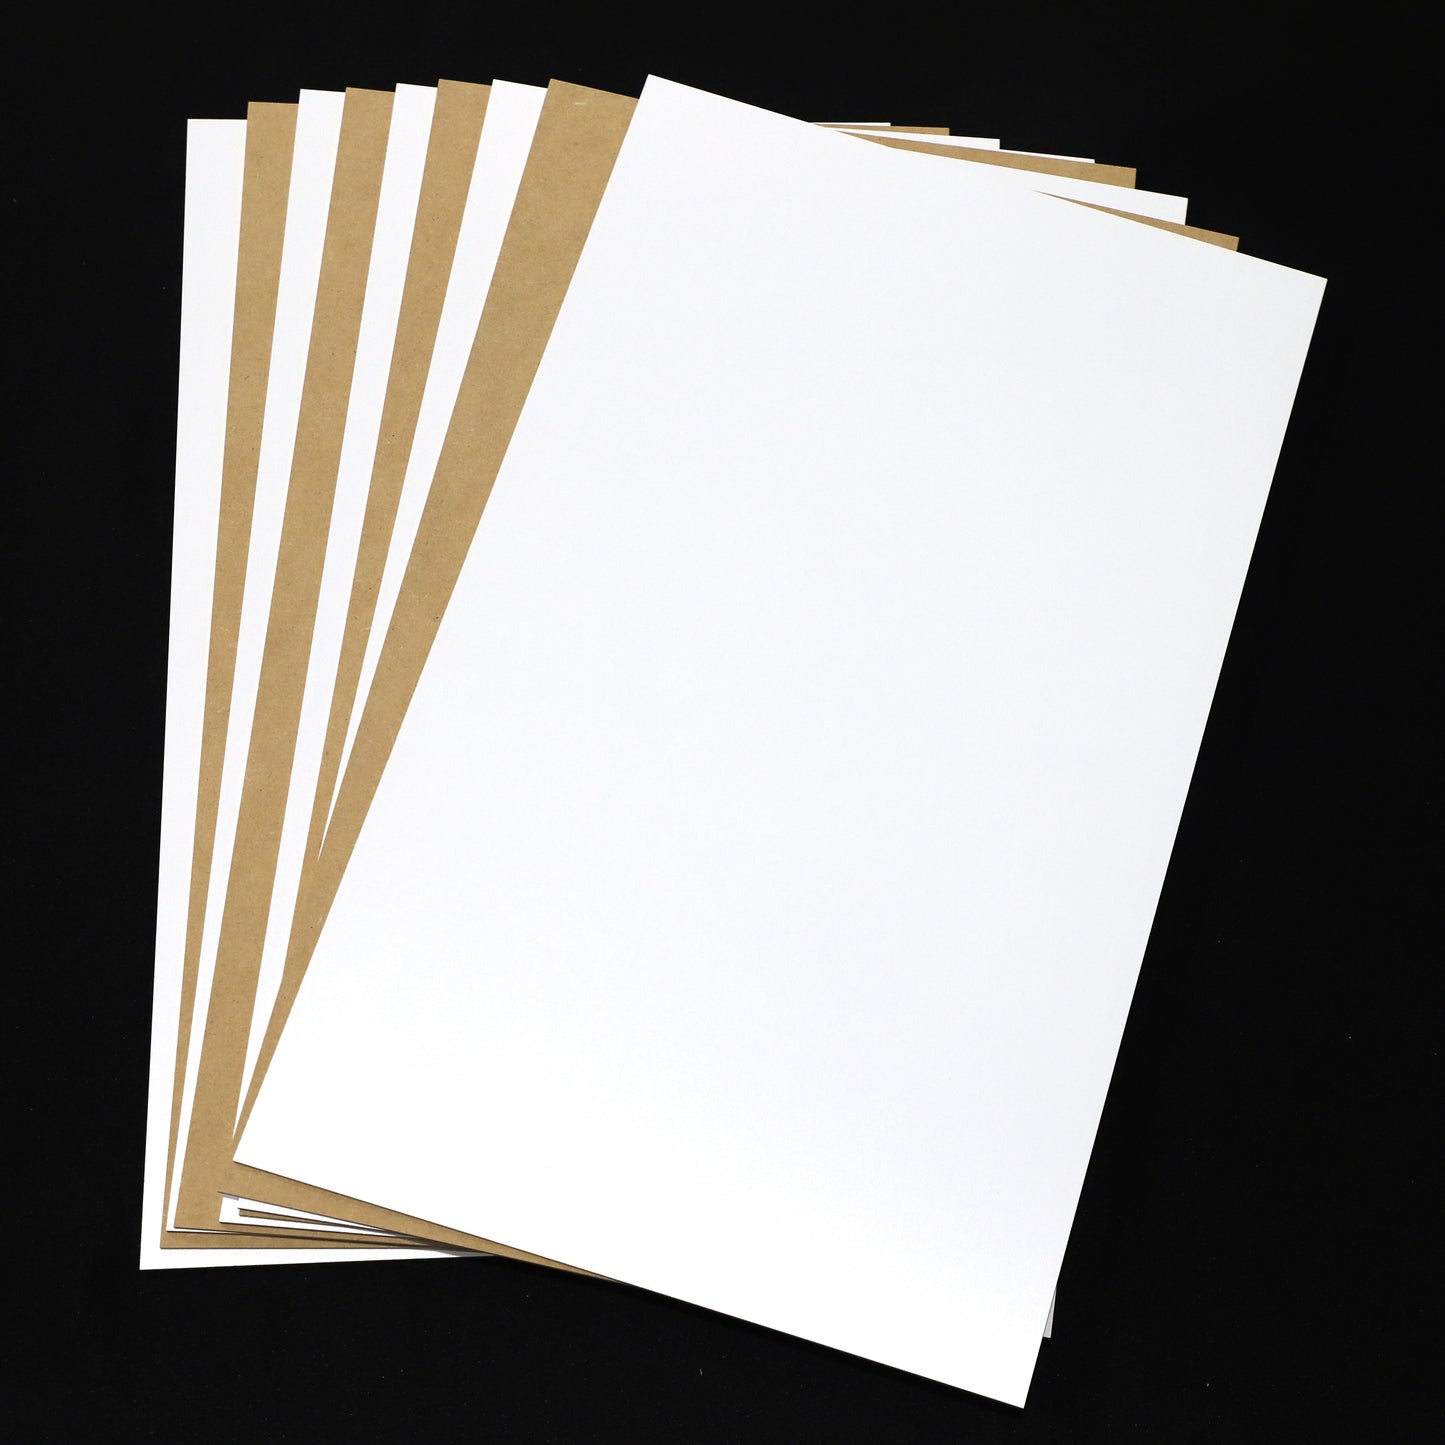 LOCAL PICK UP ONLY - 1/8" Premium White Single-Sided MDF Draft Board 19.75" x 27.75"